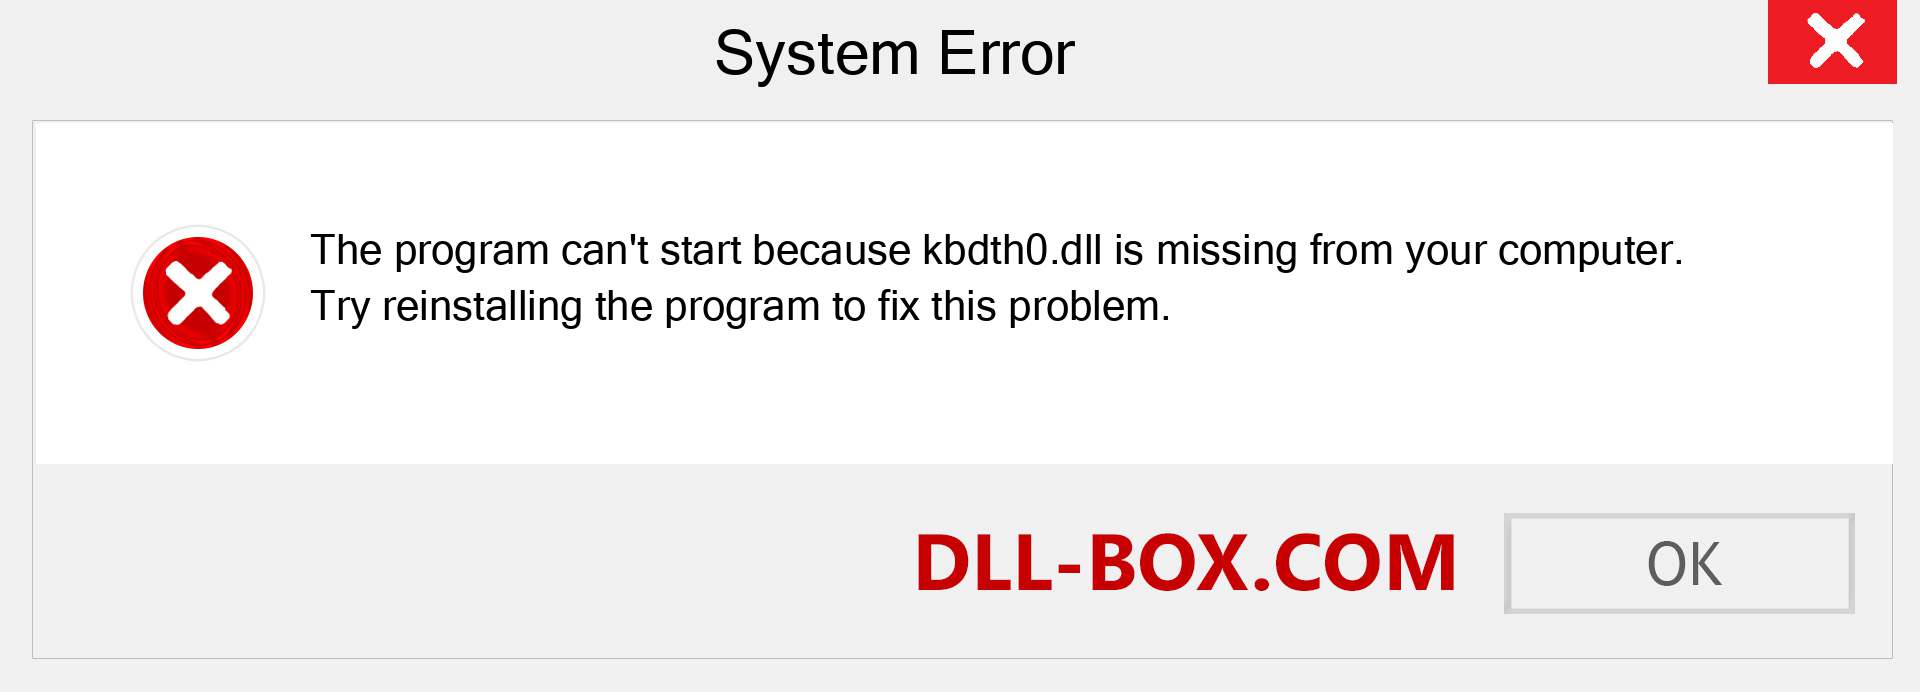  kbdth0.dll file is missing?. Download for Windows 7, 8, 10 - Fix  kbdth0 dll Missing Error on Windows, photos, images